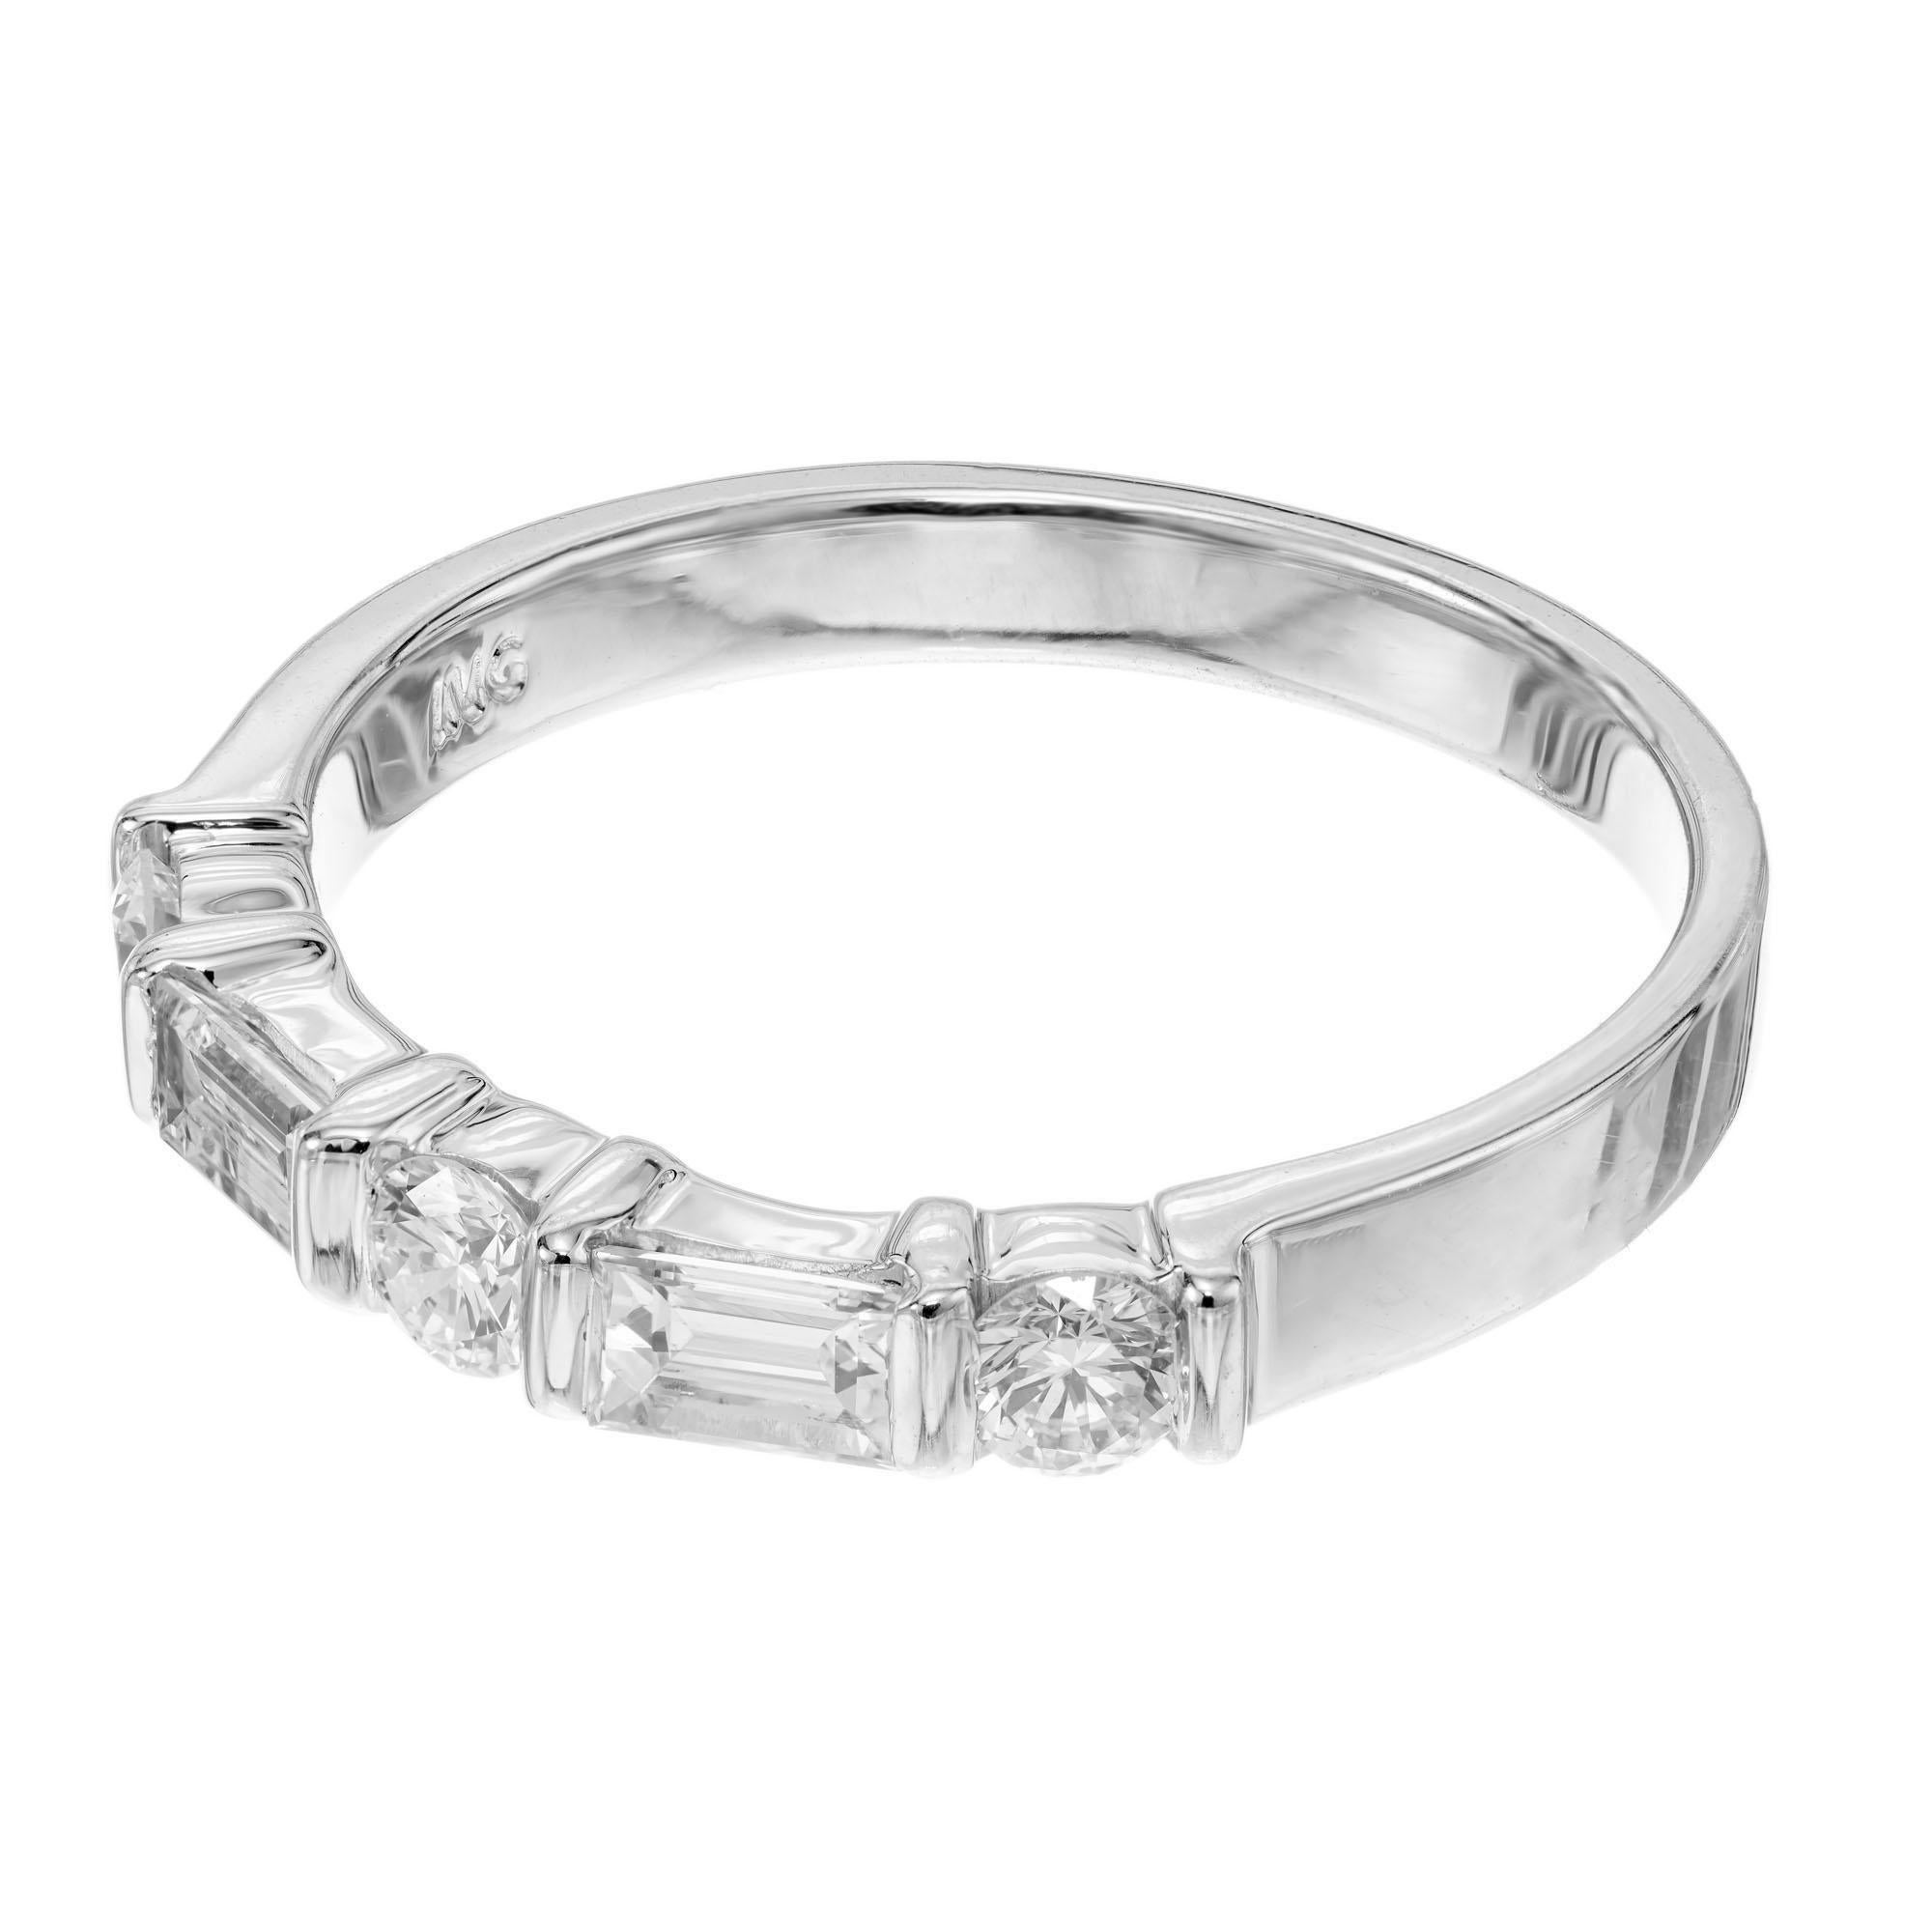 Diamond wedding band. 3 round diamonds separated by 2 baguette diamonds in a platinum setting. 

3 round diamonds approx. total weight: .24 F, VS
2 baguette diamonds approx. total weight: .20 F, VS
Size: 5.5 sizable
Platinum
Weight: 4.40 grams
